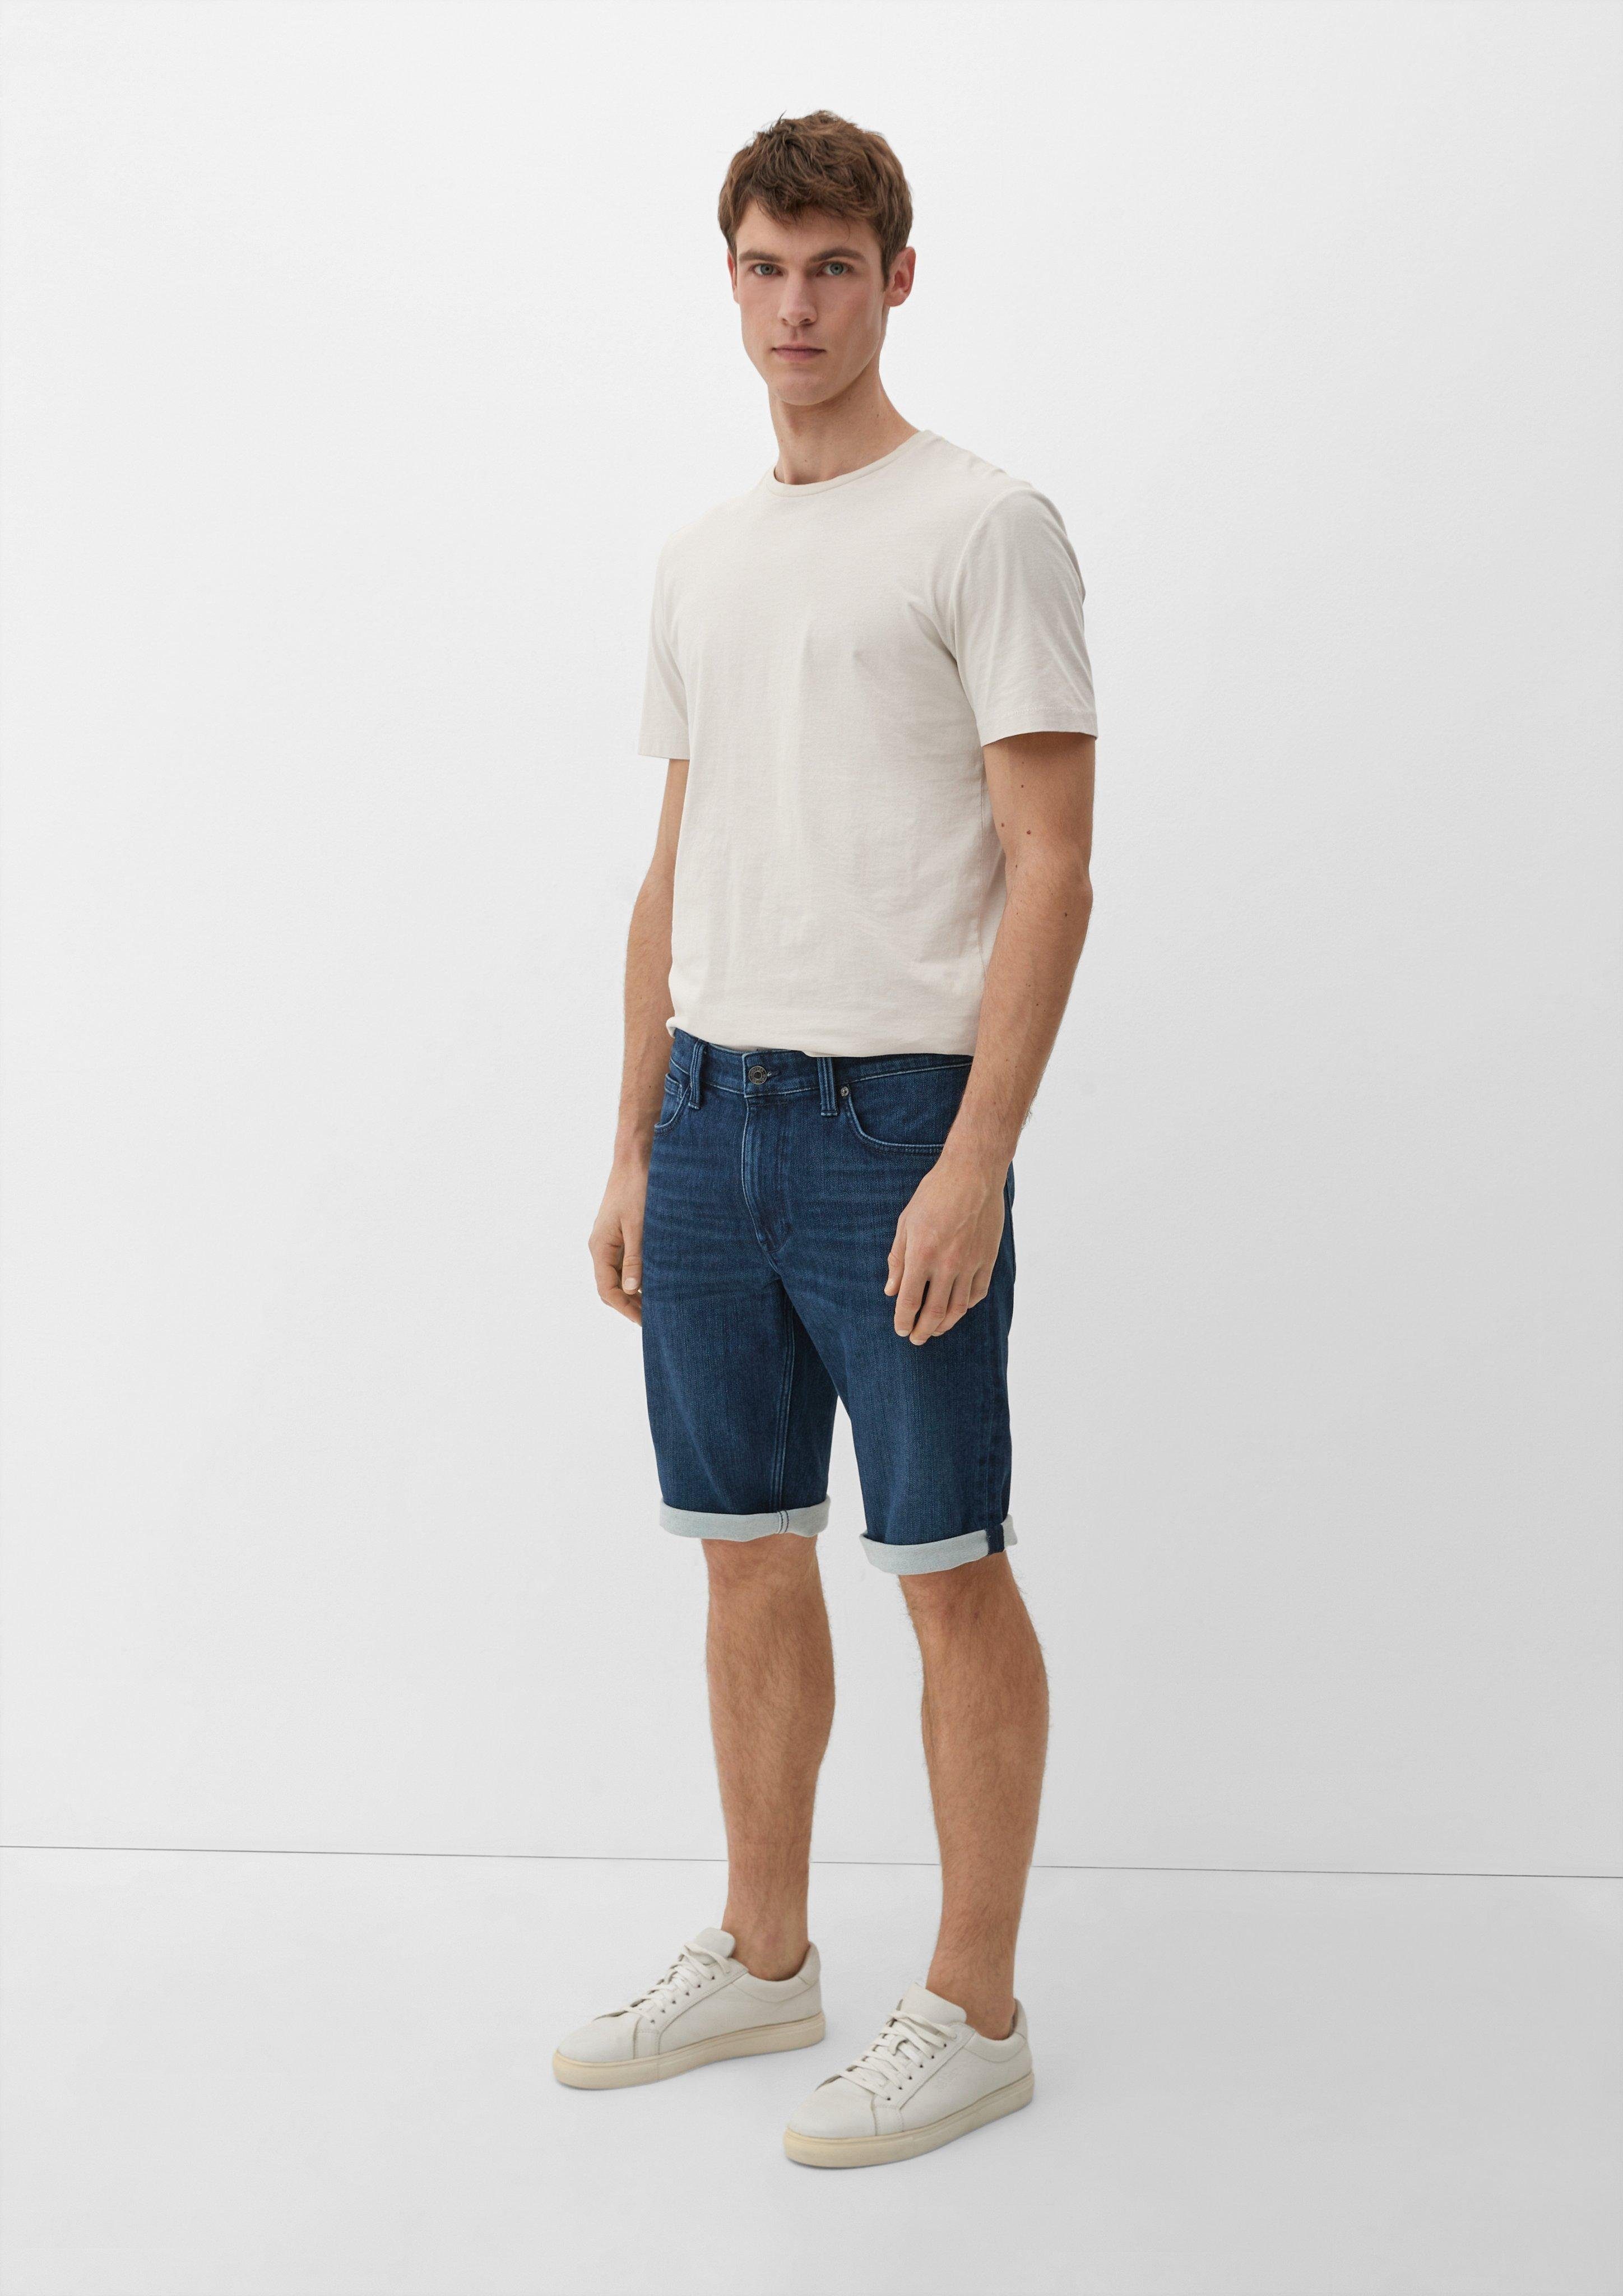 / Leg Jeans-Shorts s.Oliver Waschung Jeansshorts Fit Rise Regular Mid / Straight /